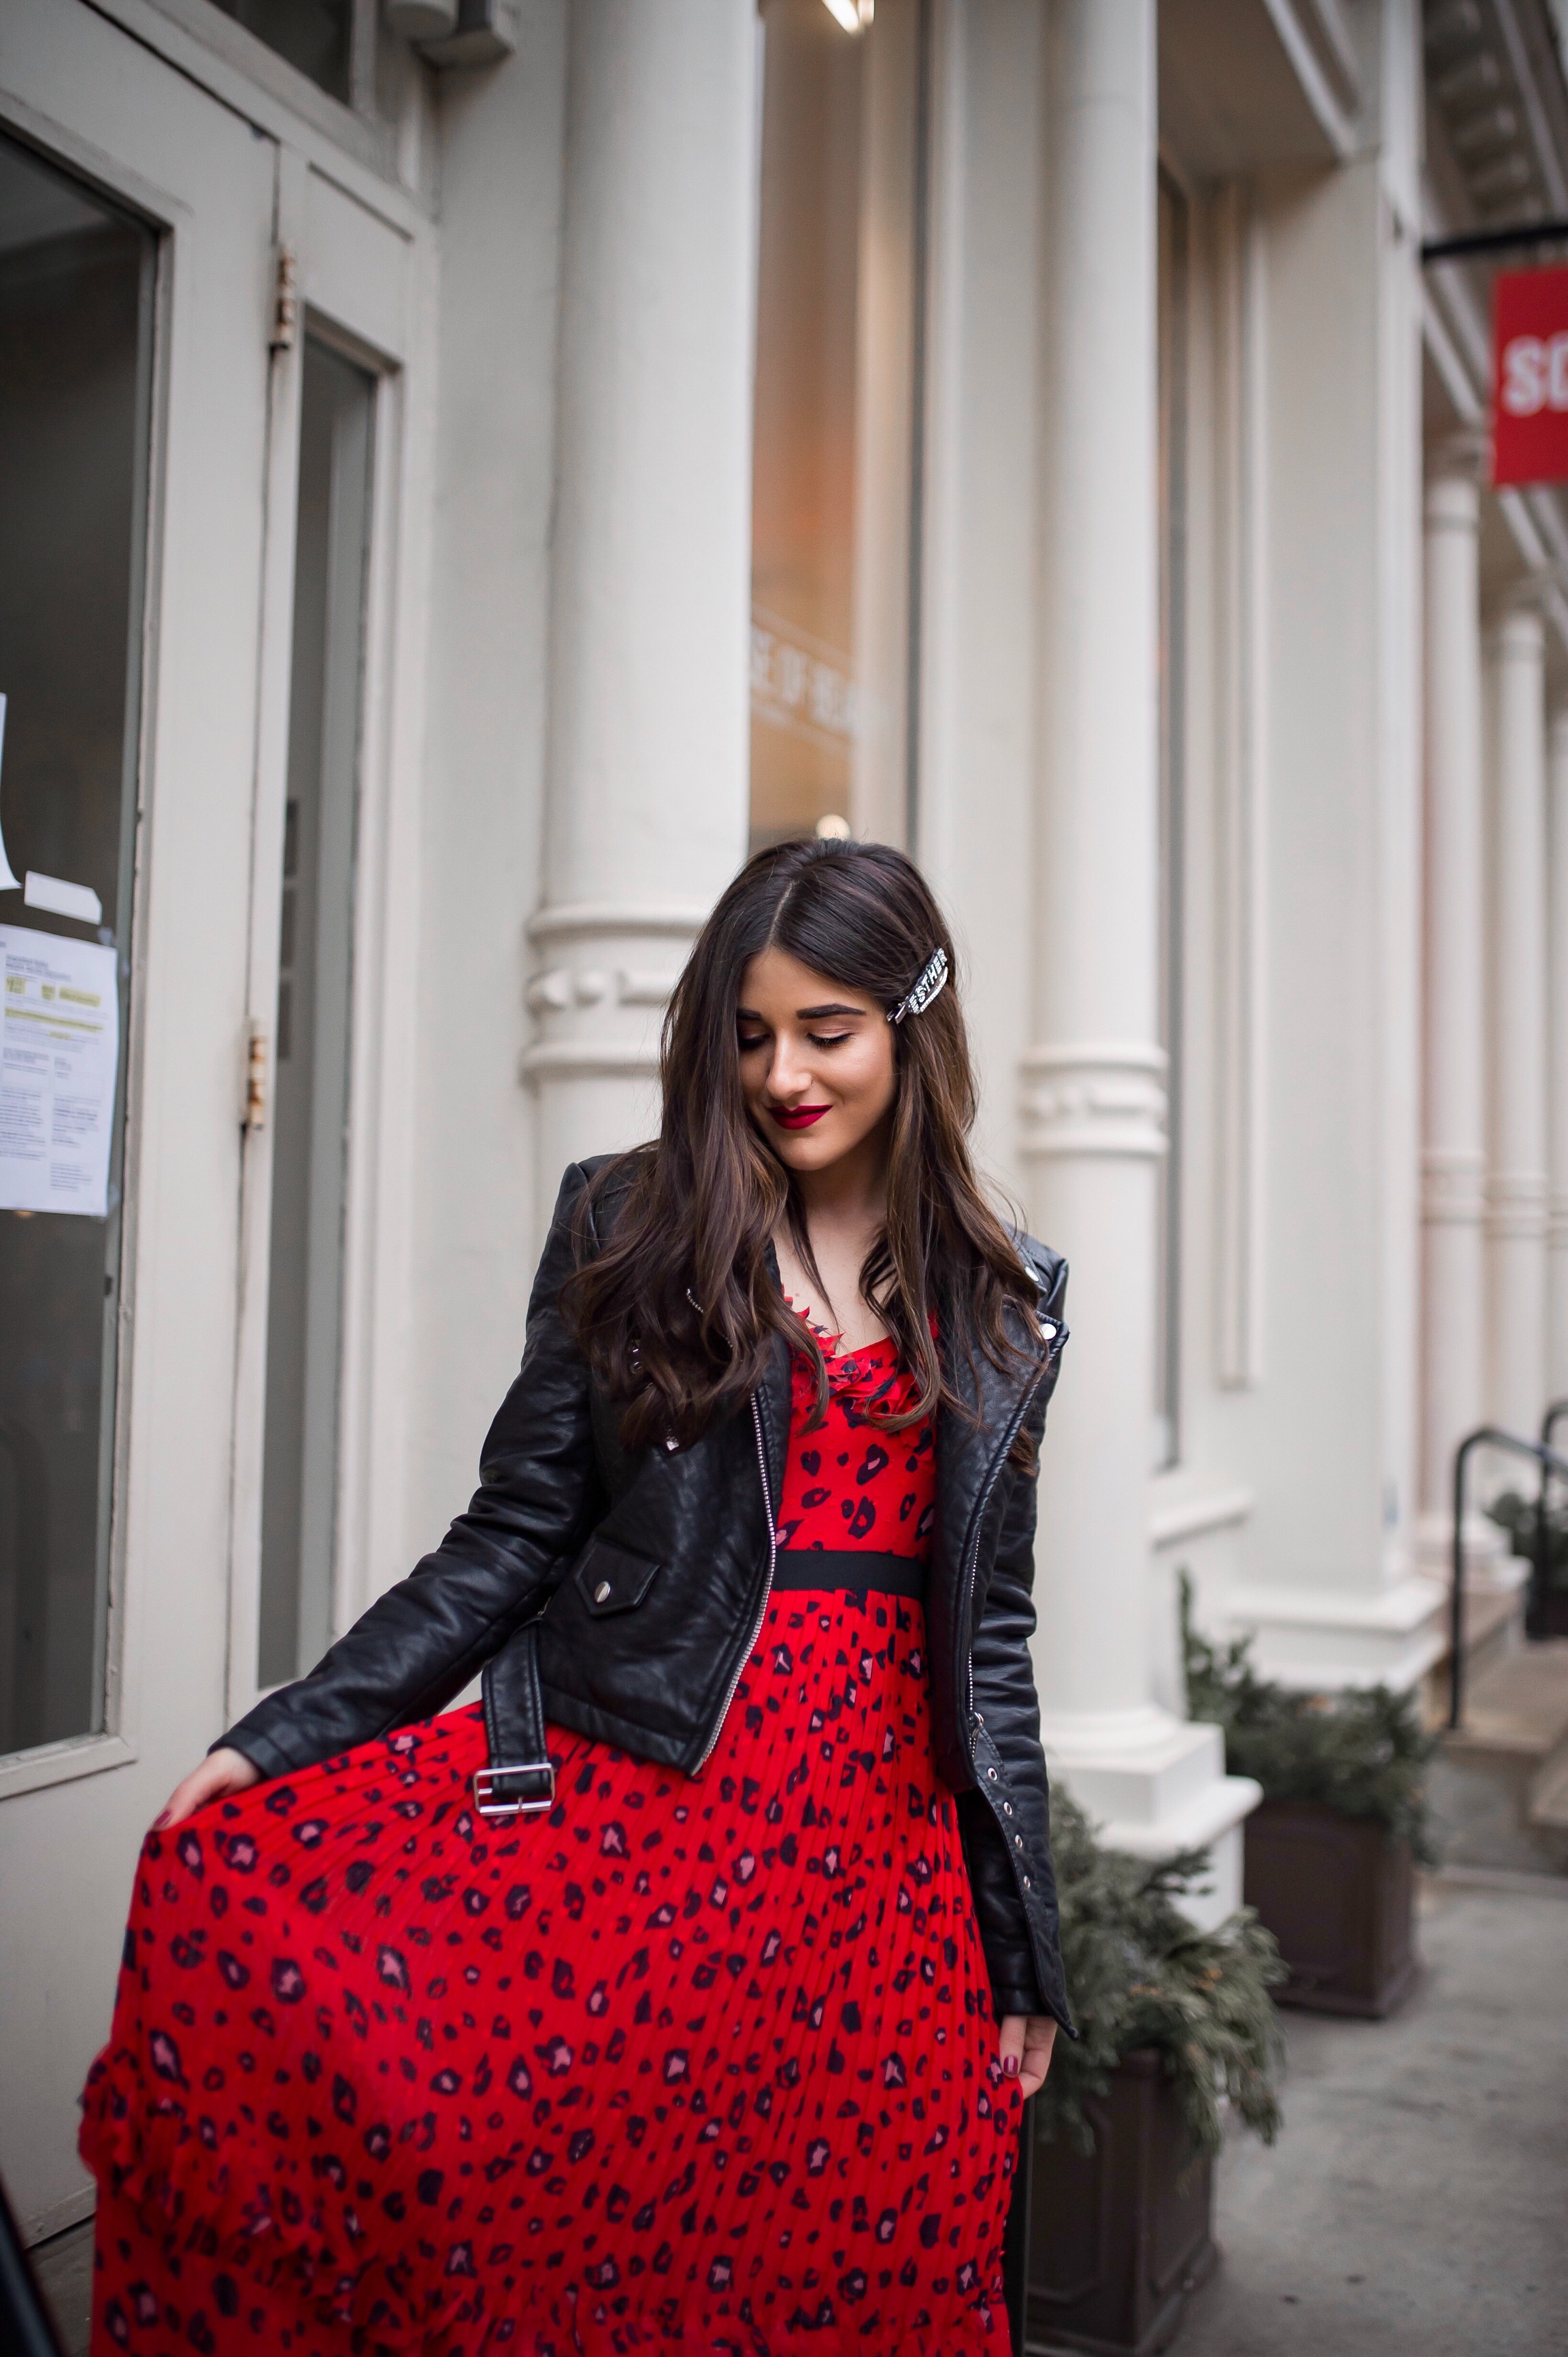 red and black leopard dress